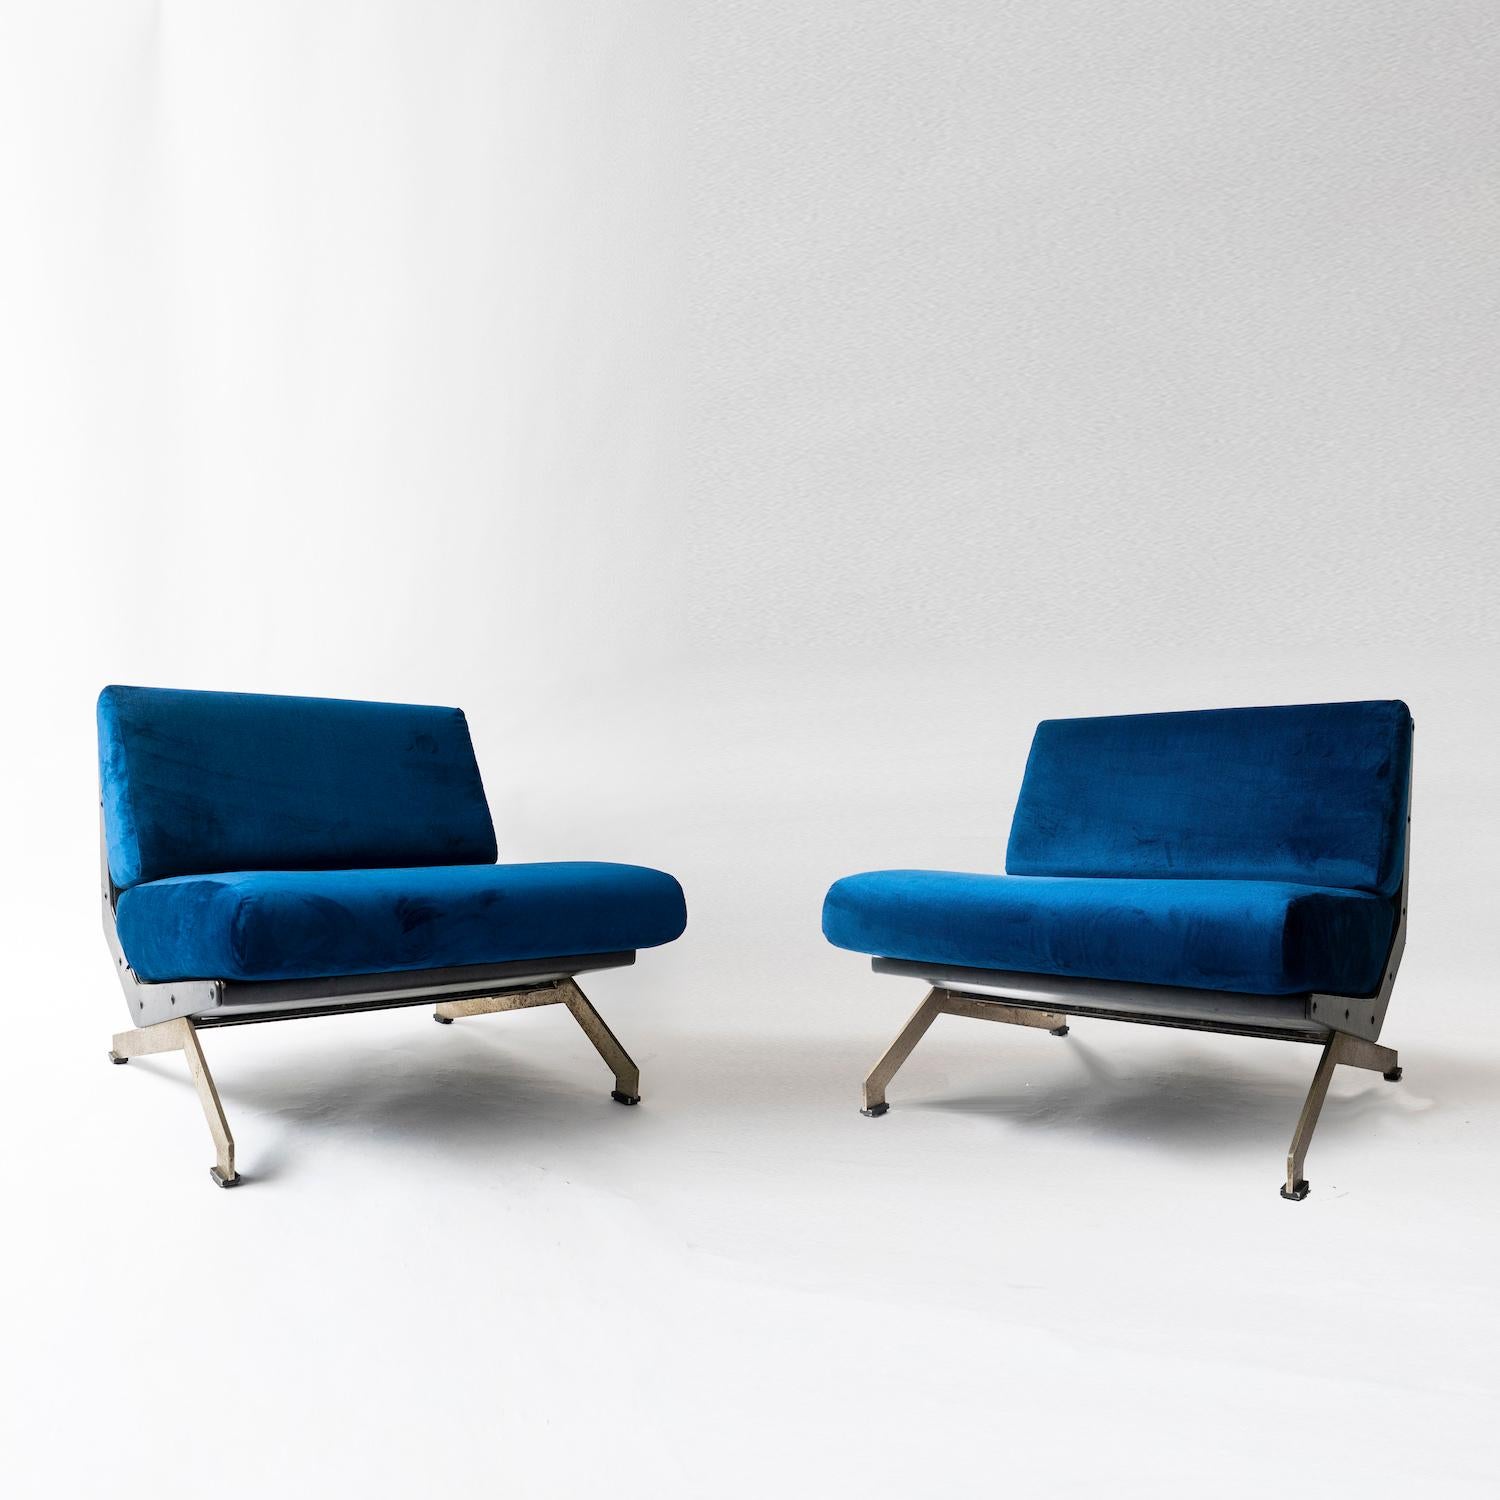 If you think these lounge chairs are tipycally Eighties, think again: for how incredible it might seem, Gianni Moscatelli designed these beauties in 1969 for italian furniture brand Formanova. The choice of materials was definitely futuristic back